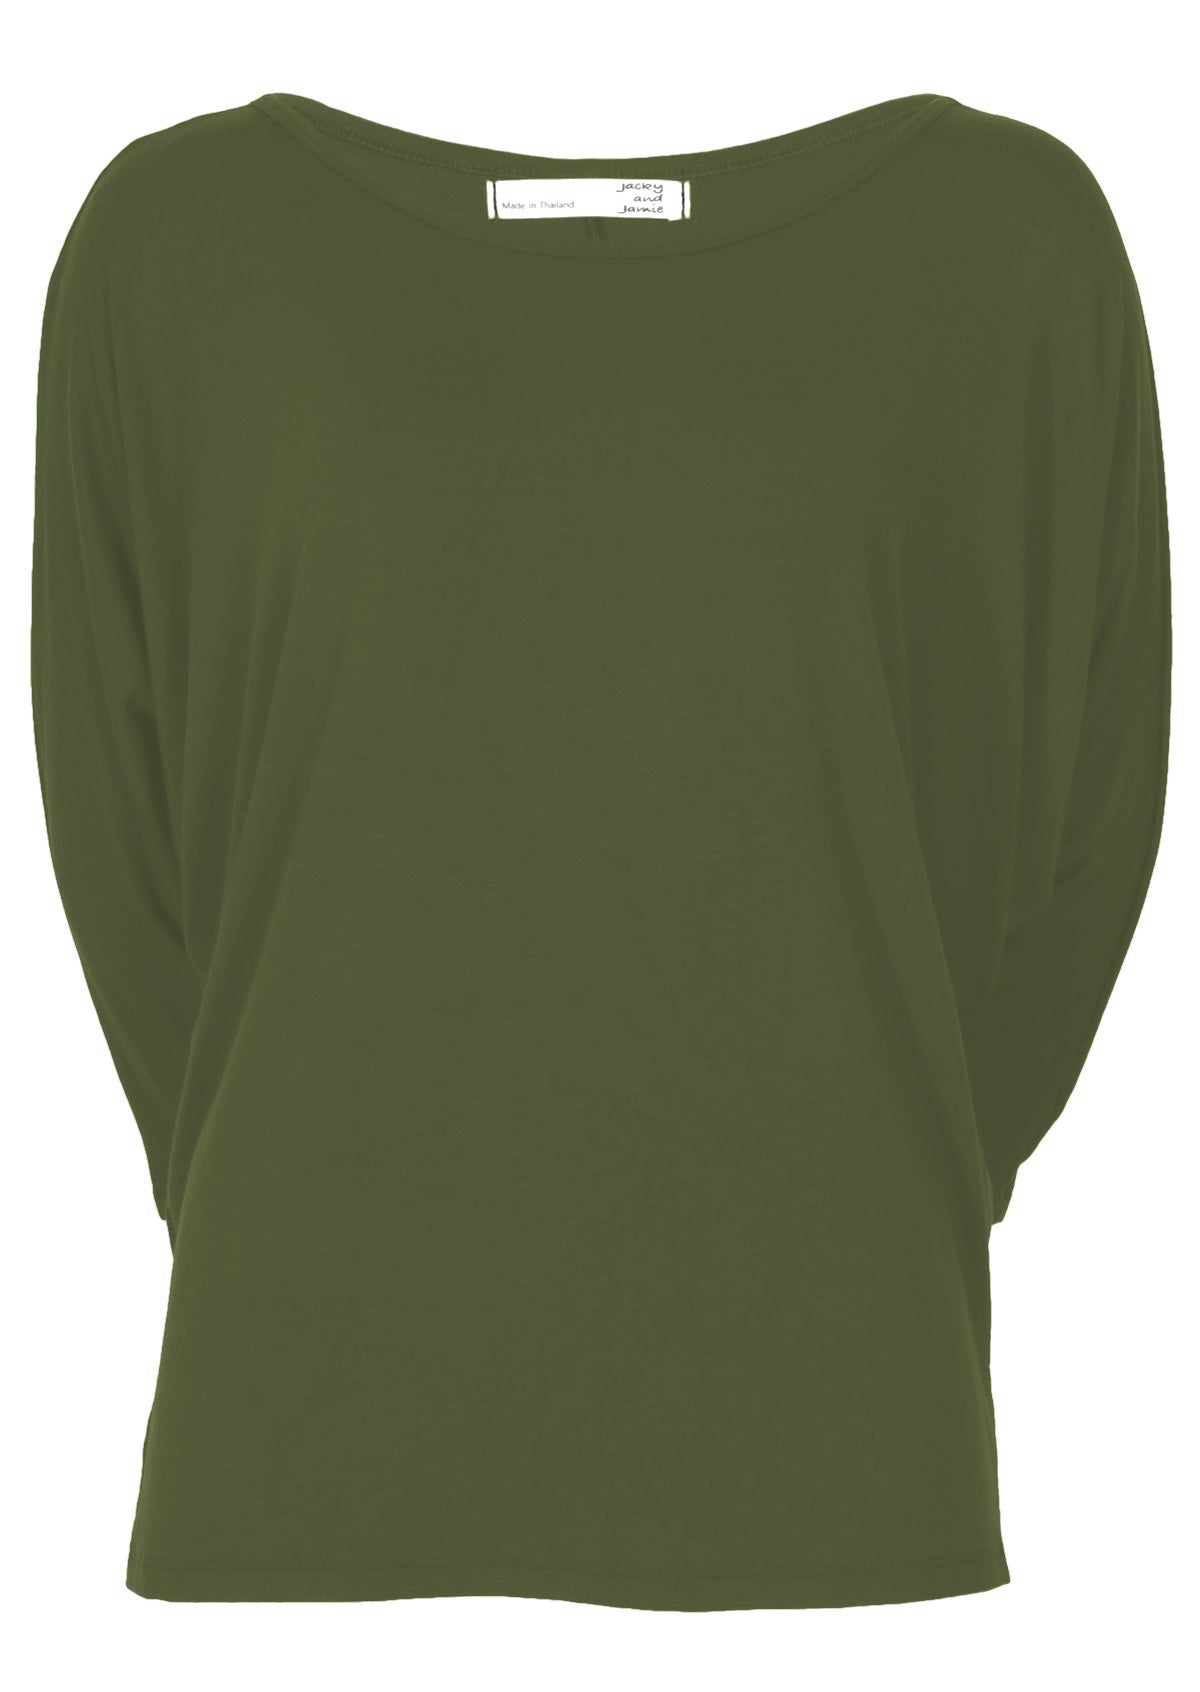 Front view of women's 3/4 sleeve rayon batwing round neckline olive green top.